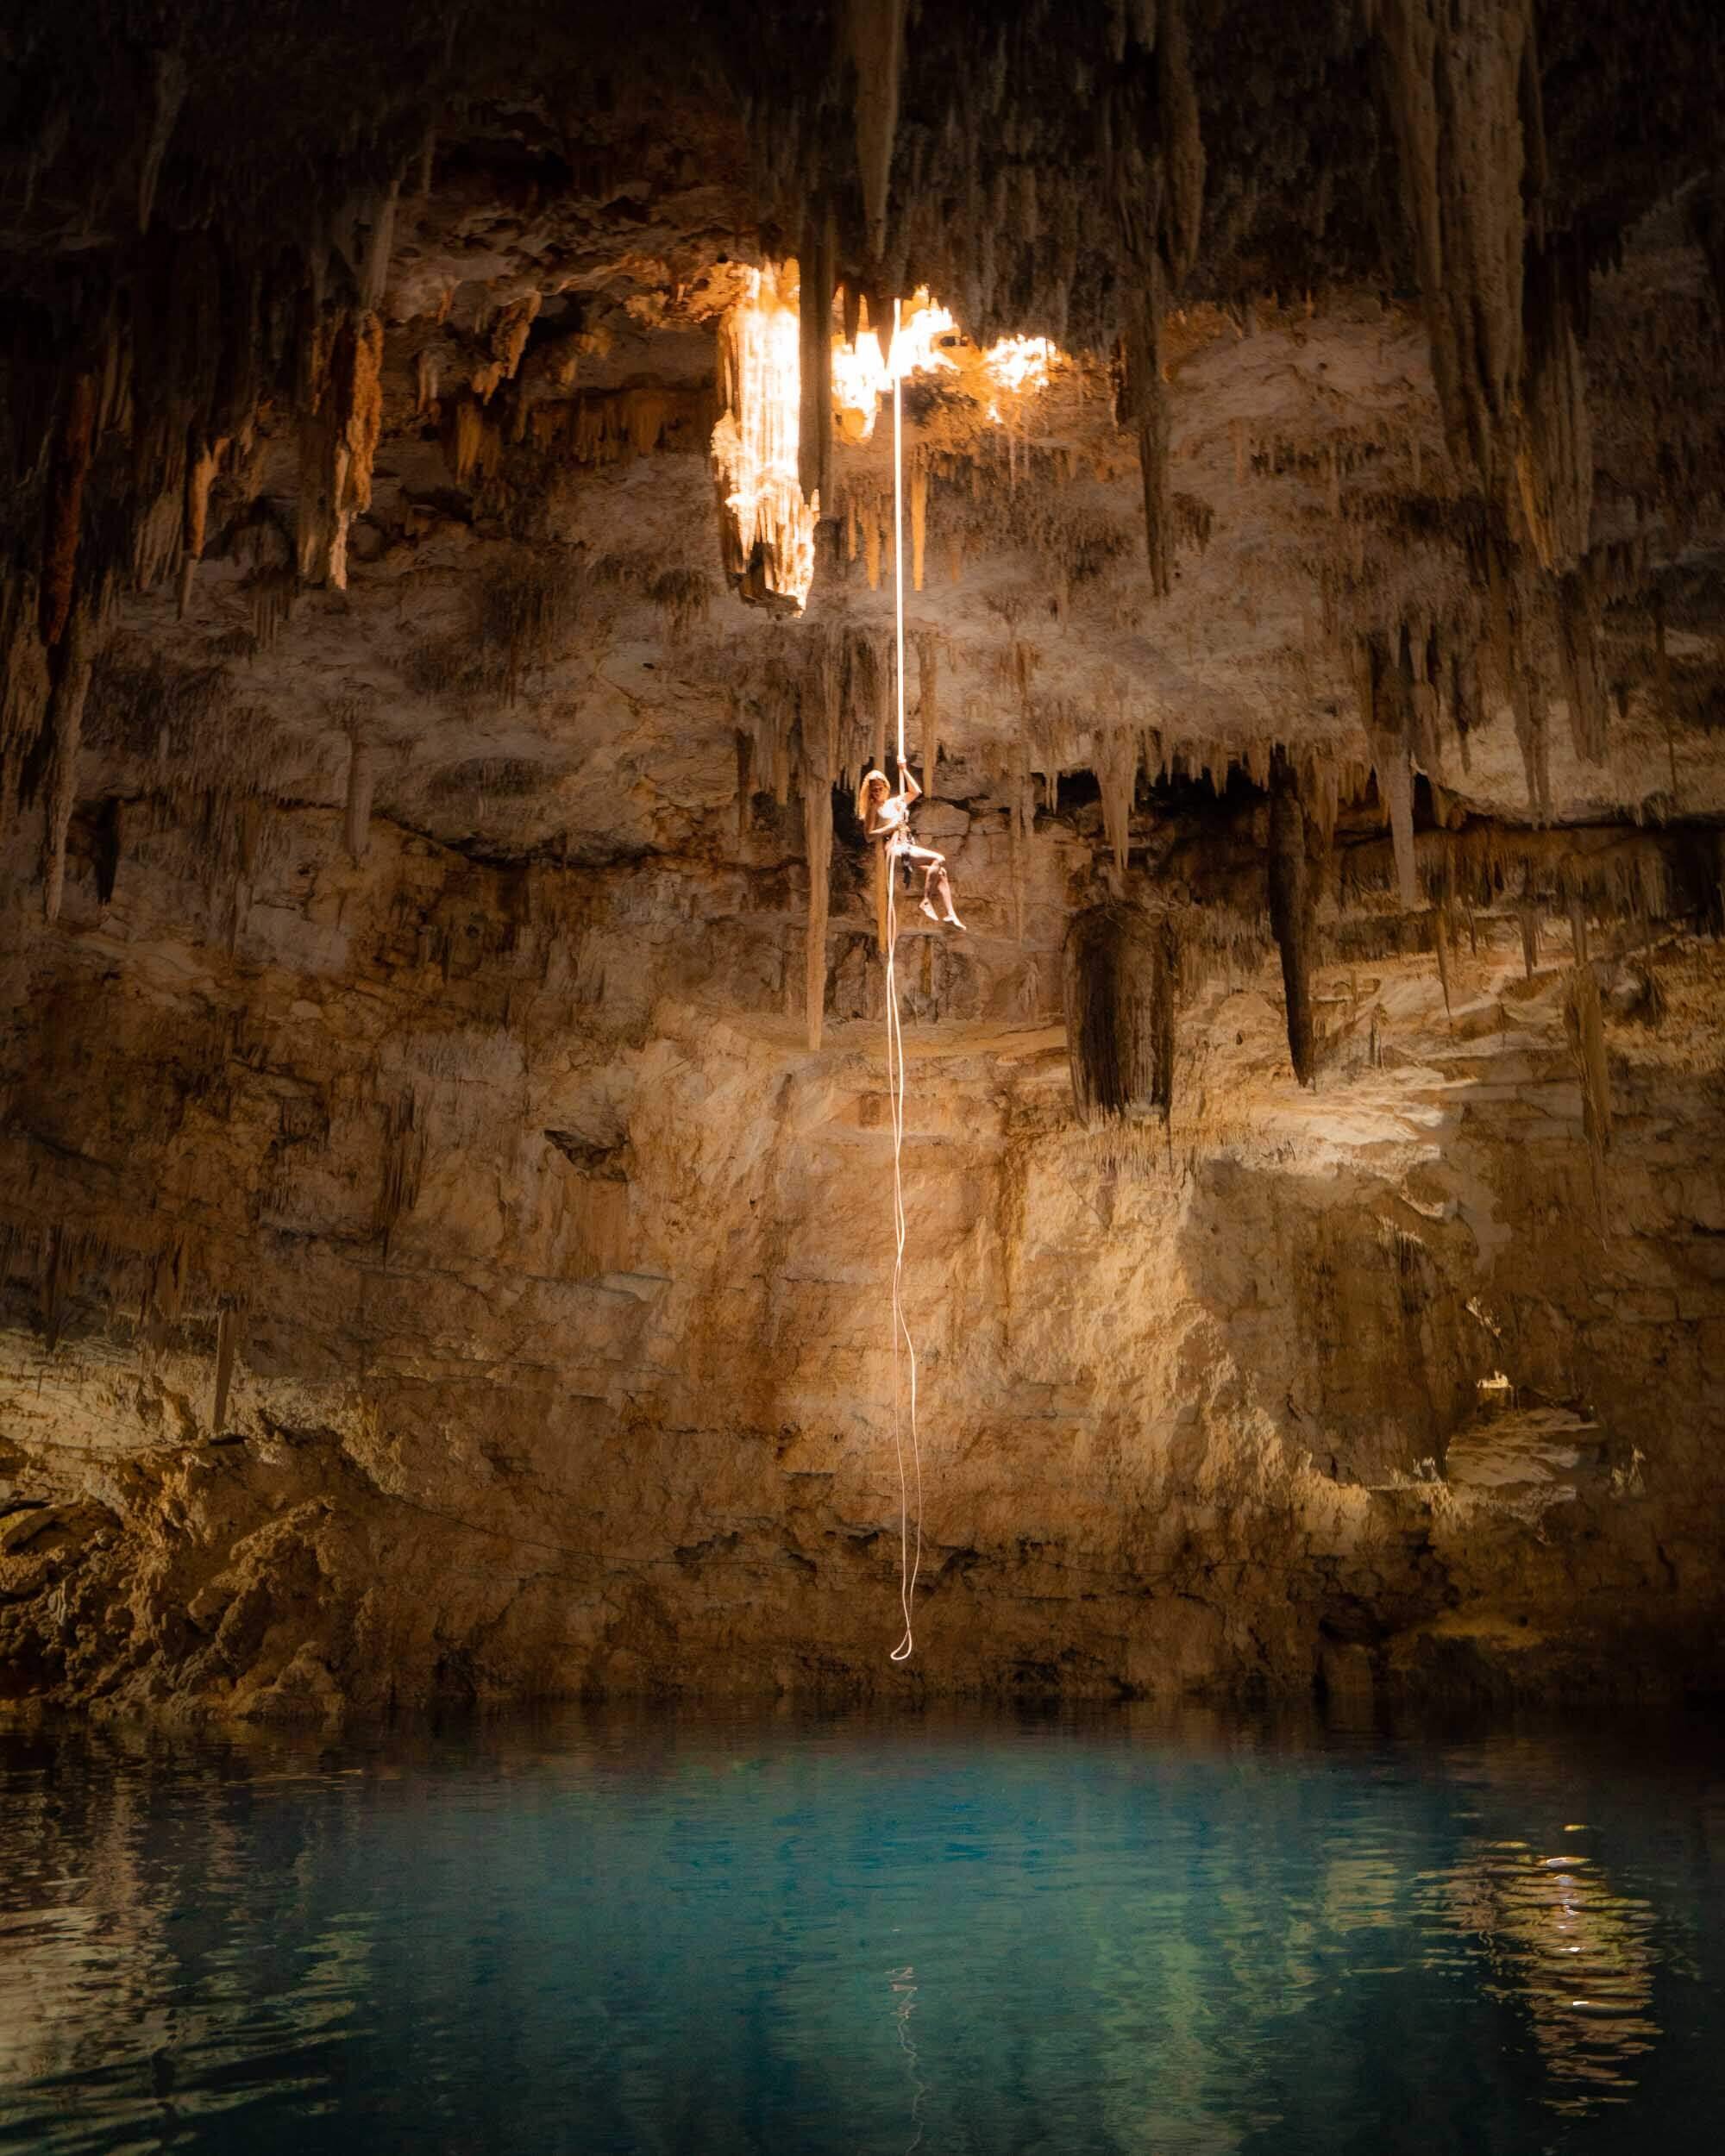 Make sure to ask about the option to rappel down into Cenote Palomita!